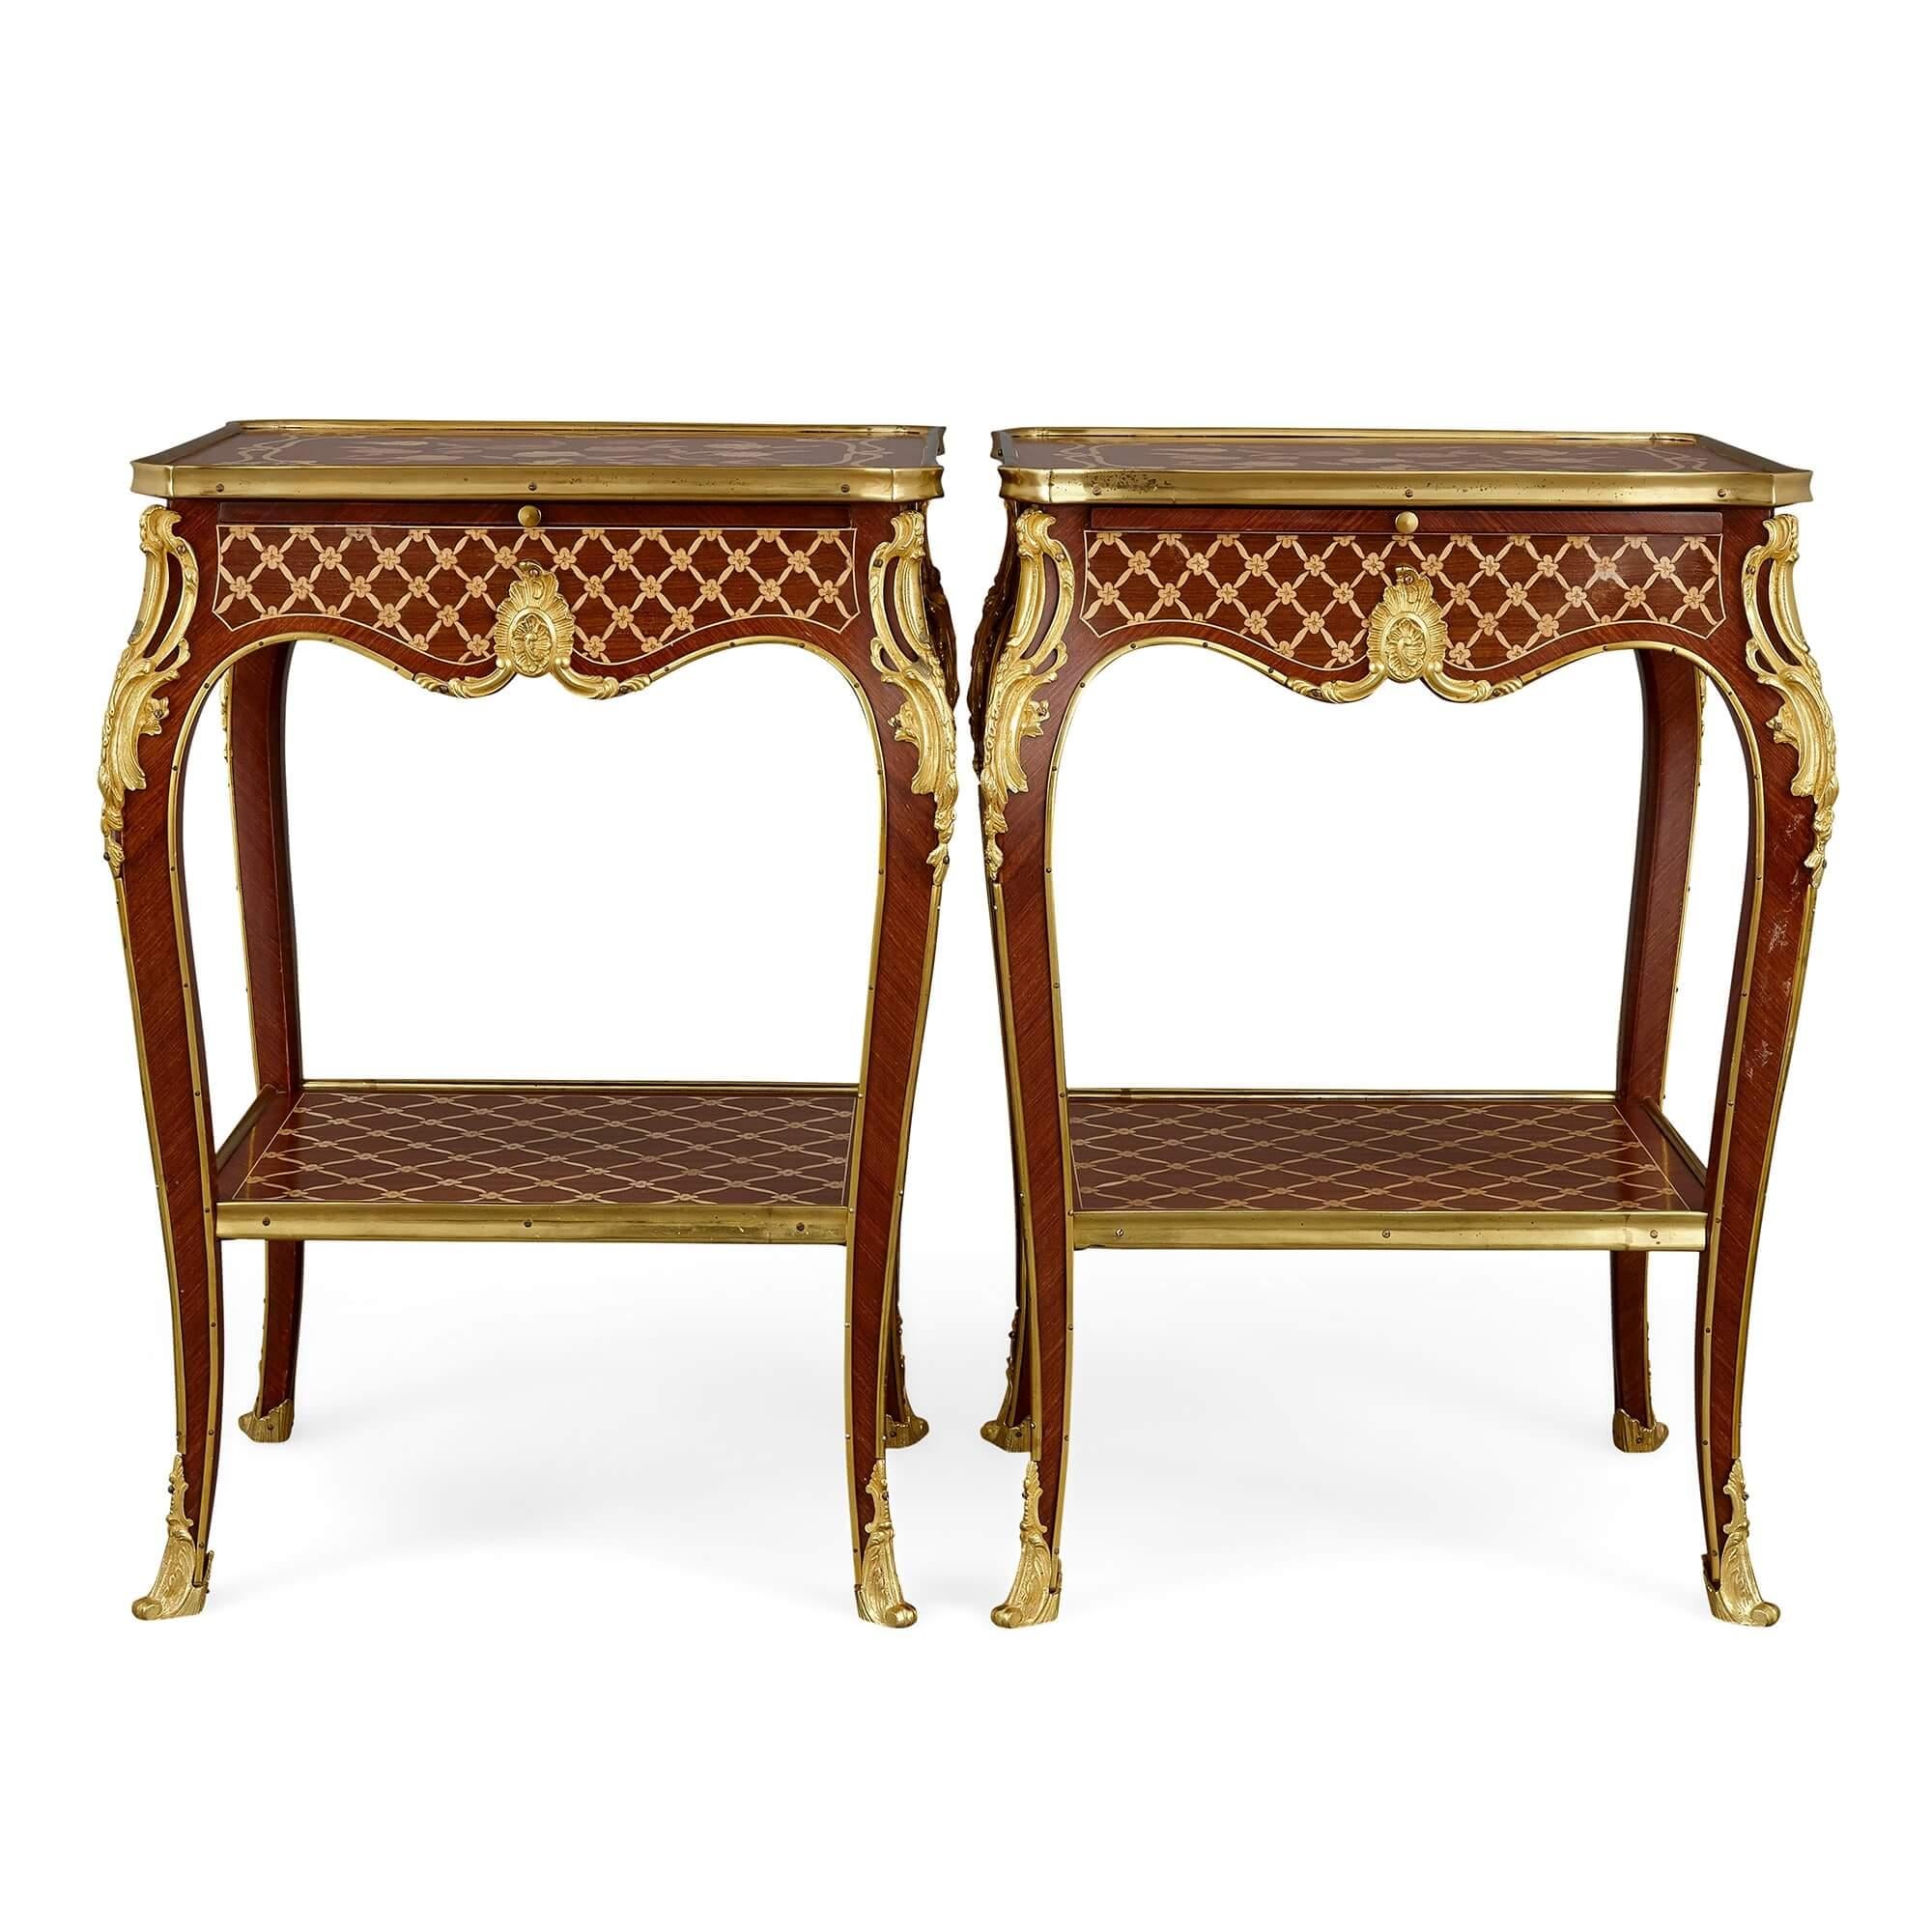 Featuring marquetry, parquetry, and gilt-bronze decoration, these intricate and elaborate side tables are crafted in stunning Rococo and Louis XV fashion. 

This pair of Louis XV style side tables are decorated with a trio of techniques to form a